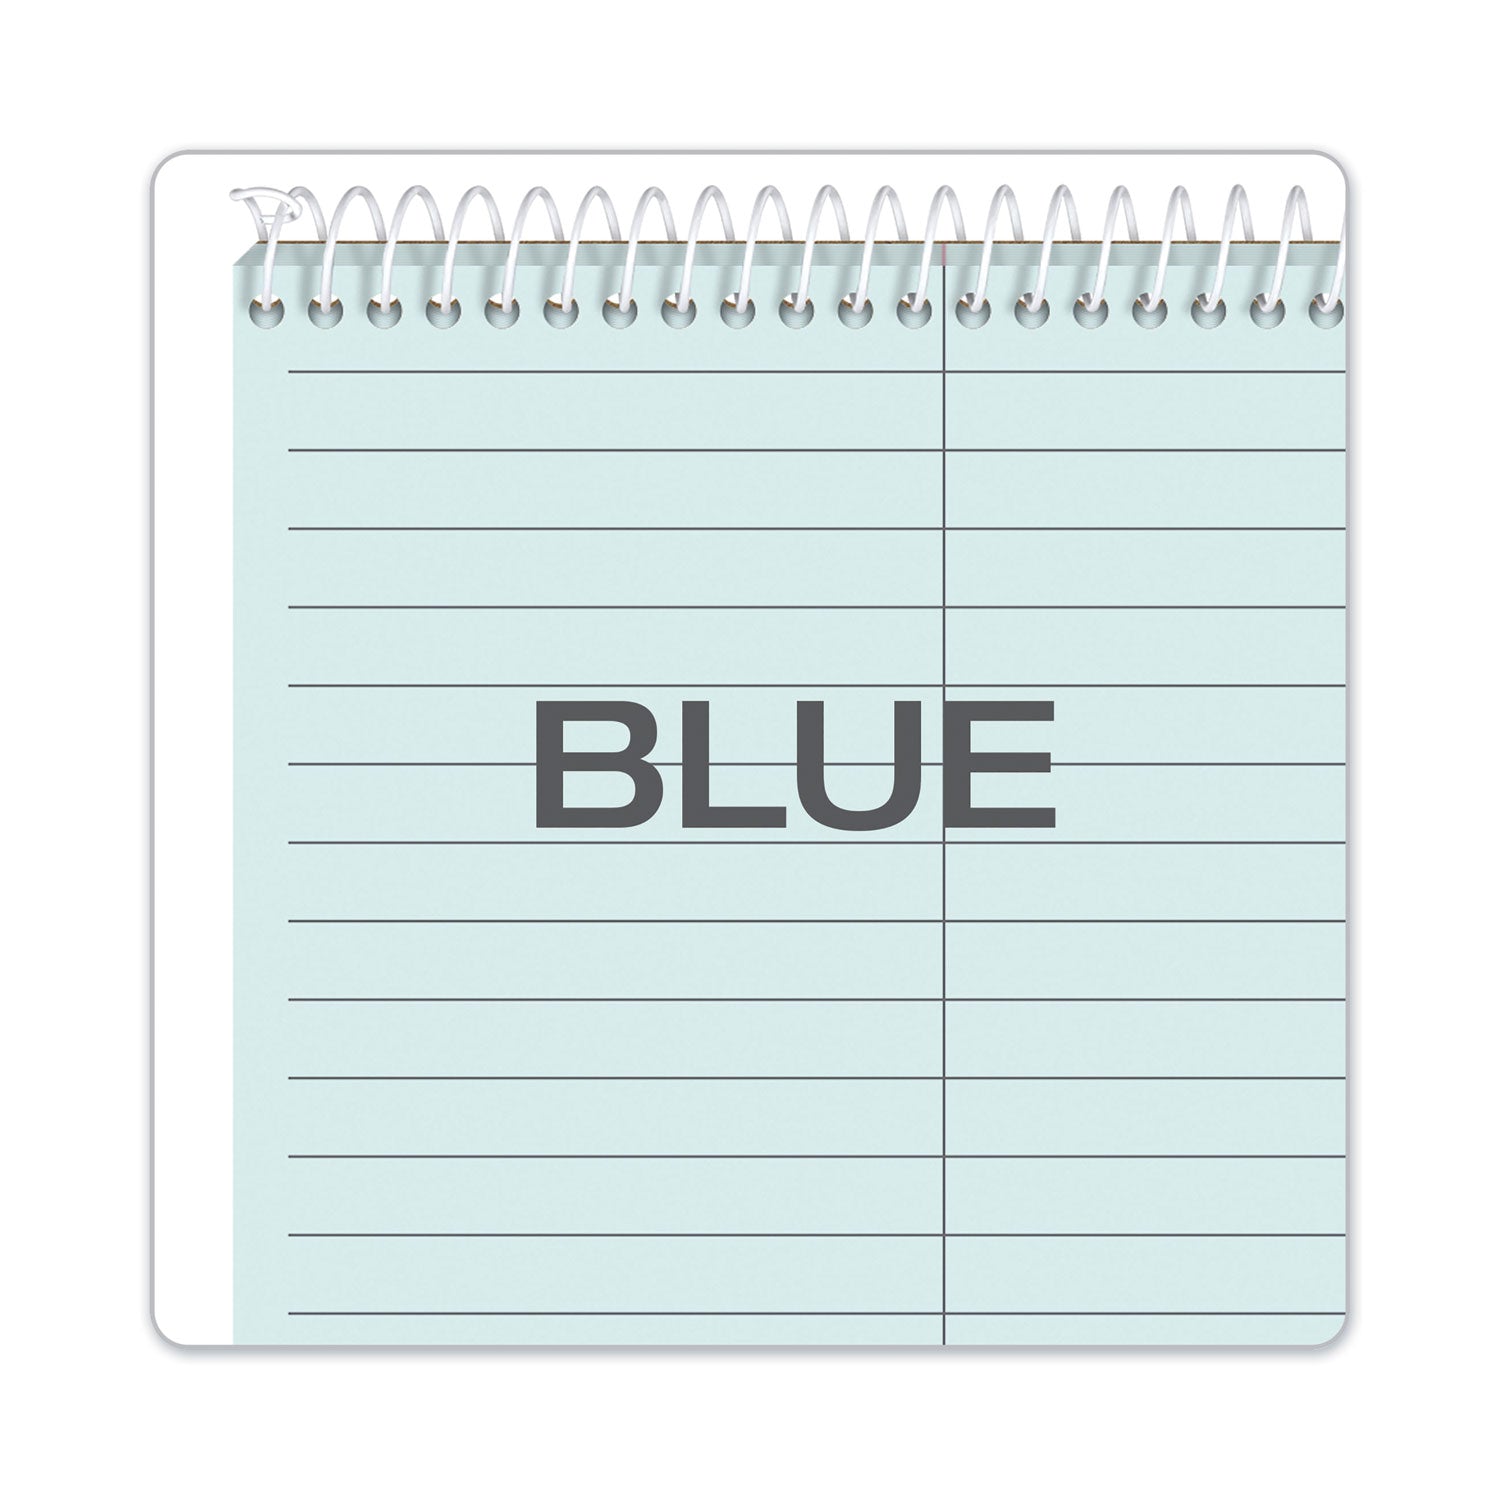 Prism Steno Pads, Gregg Rule, Blue Cover, 80 Blue 6 x 9 Sheets, 4/Pack - 